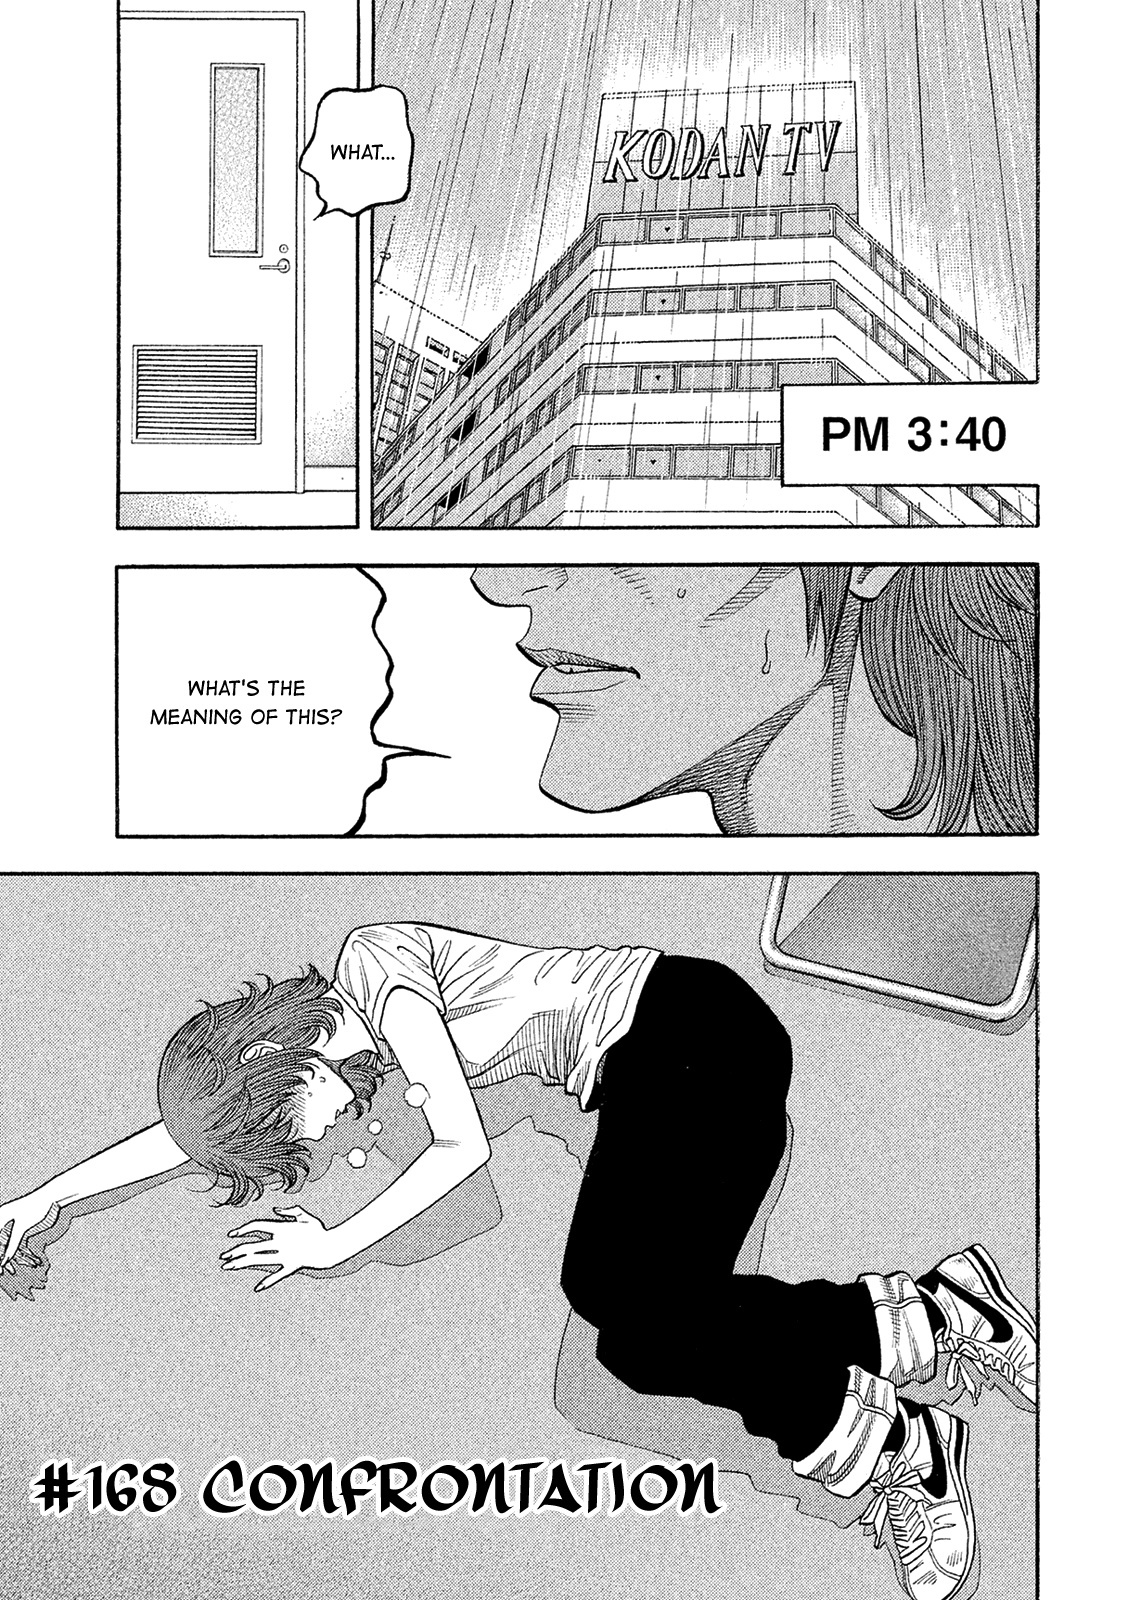 Montage (Watanabe Jun) Chapter 168: Confrontation - Picture 1